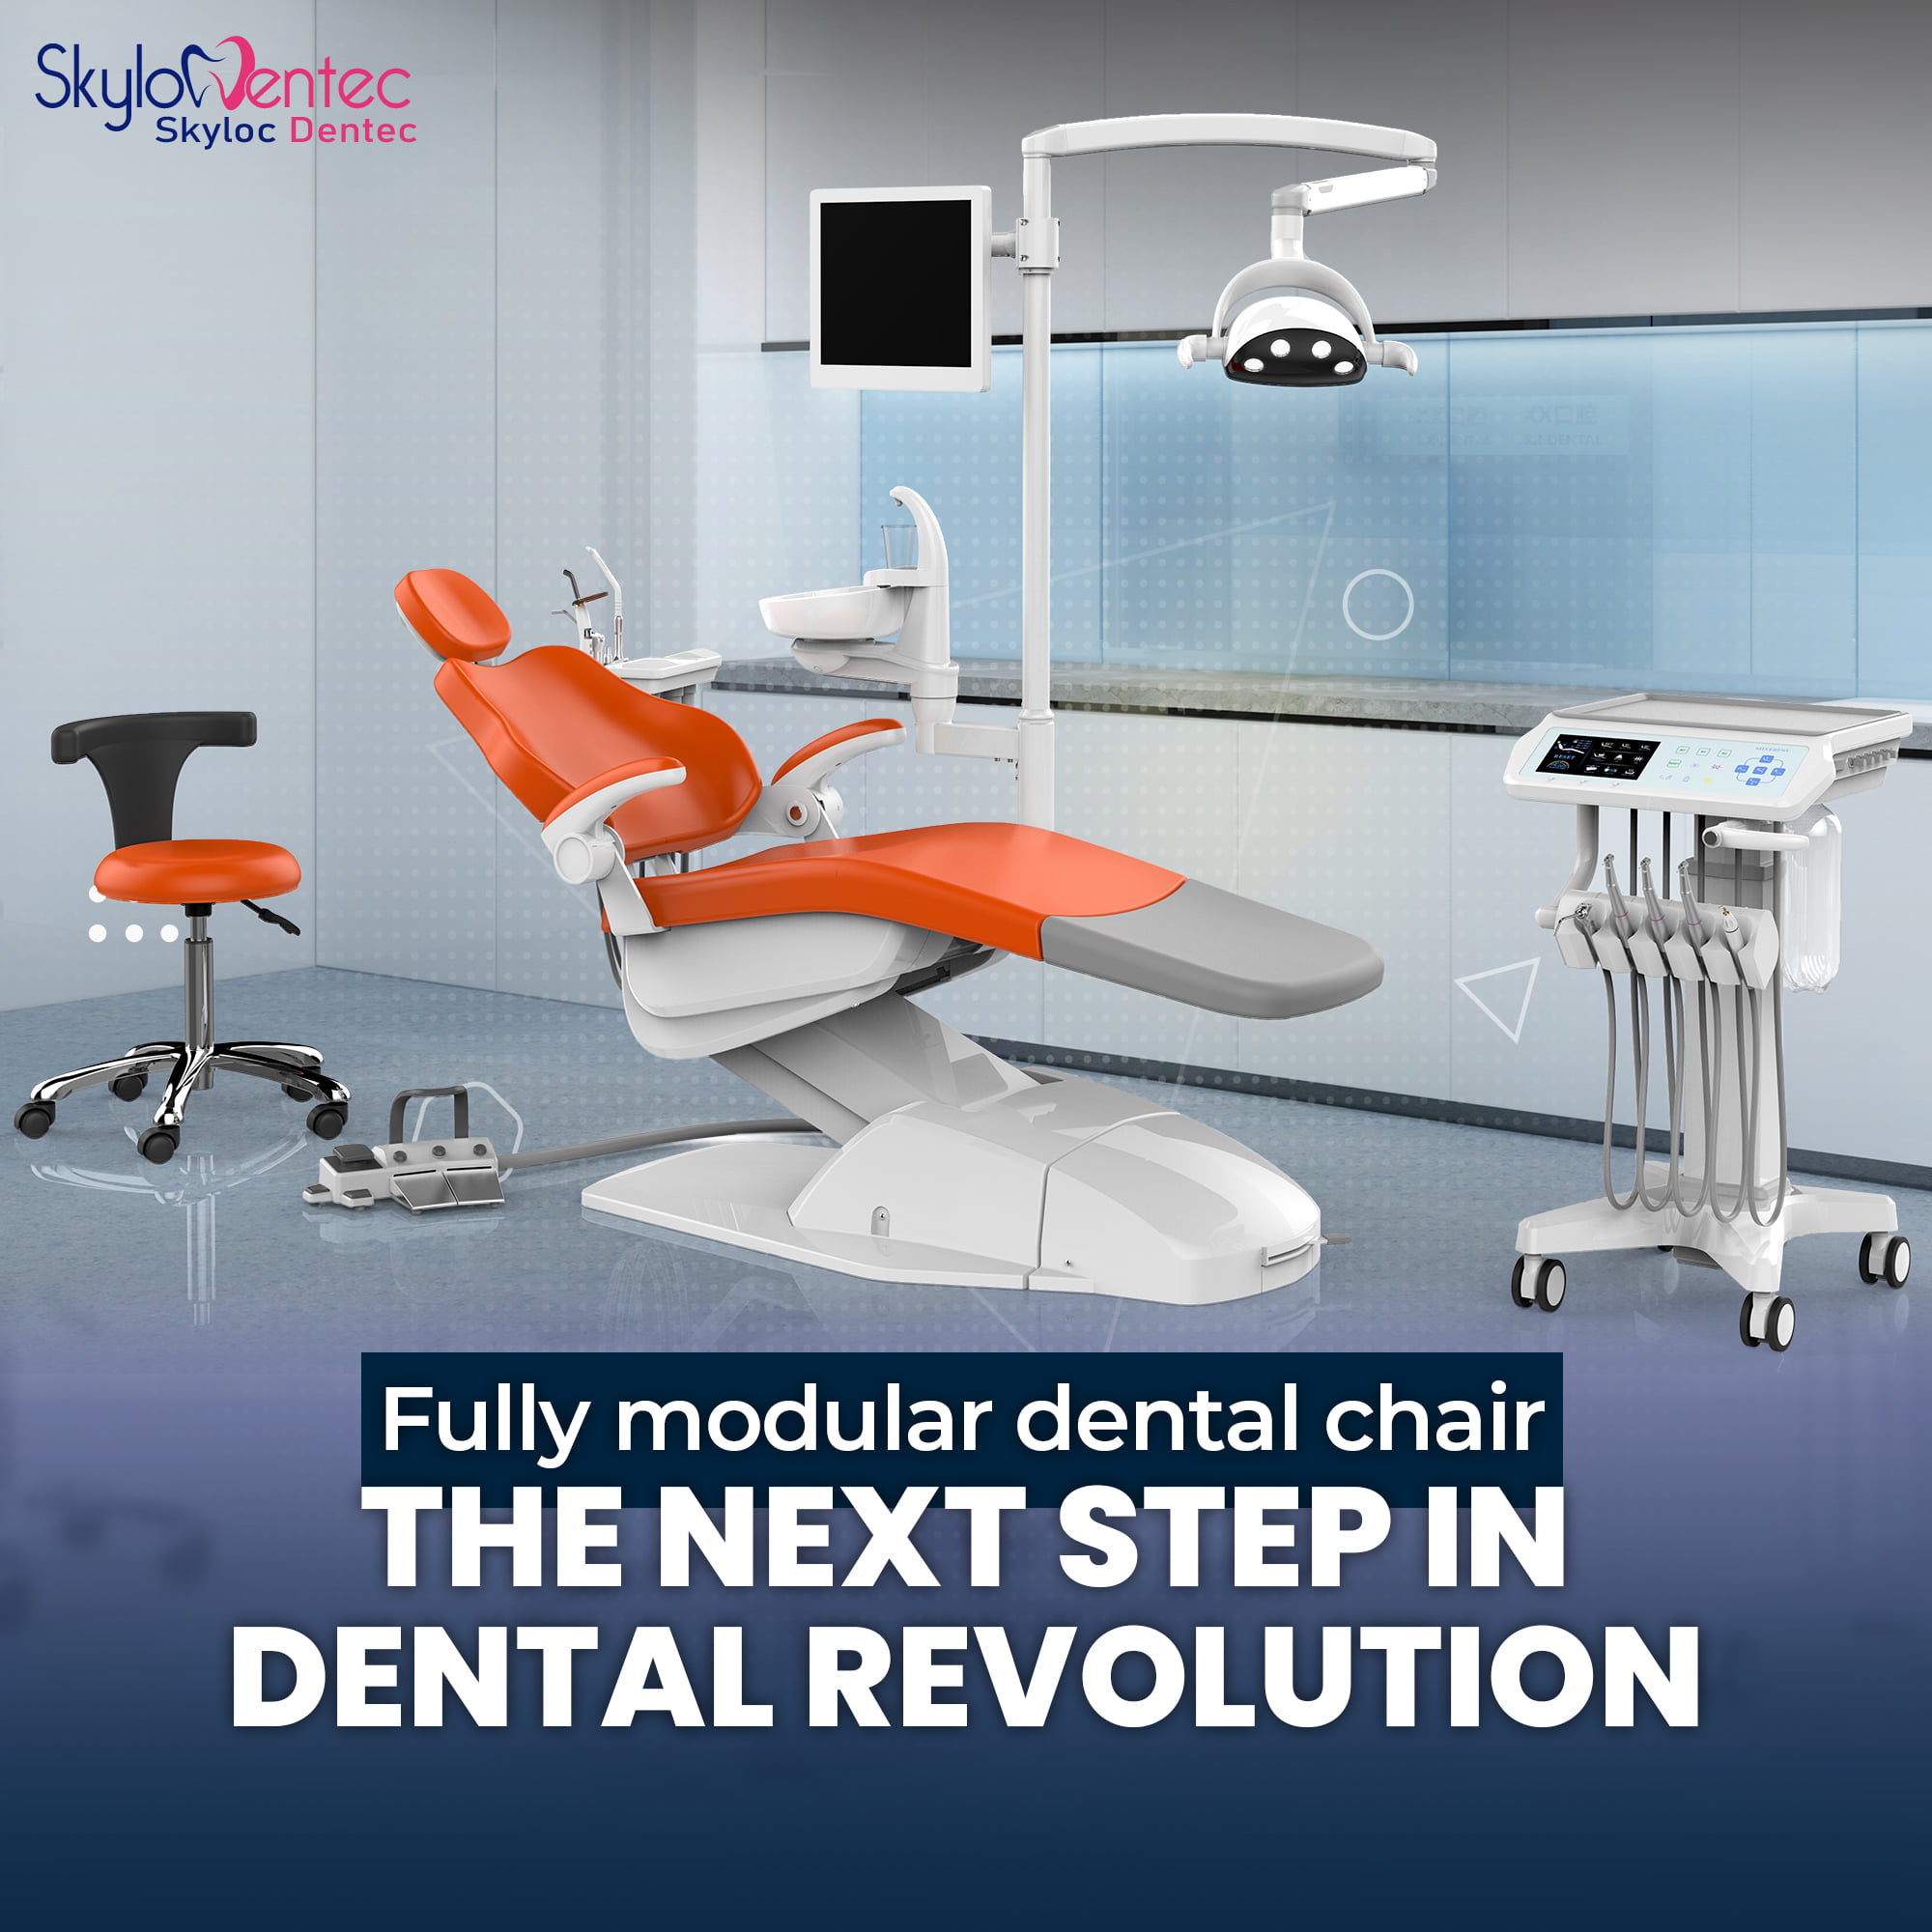 HOW TO CHOOSE THE BEST DENTAL CHAIR